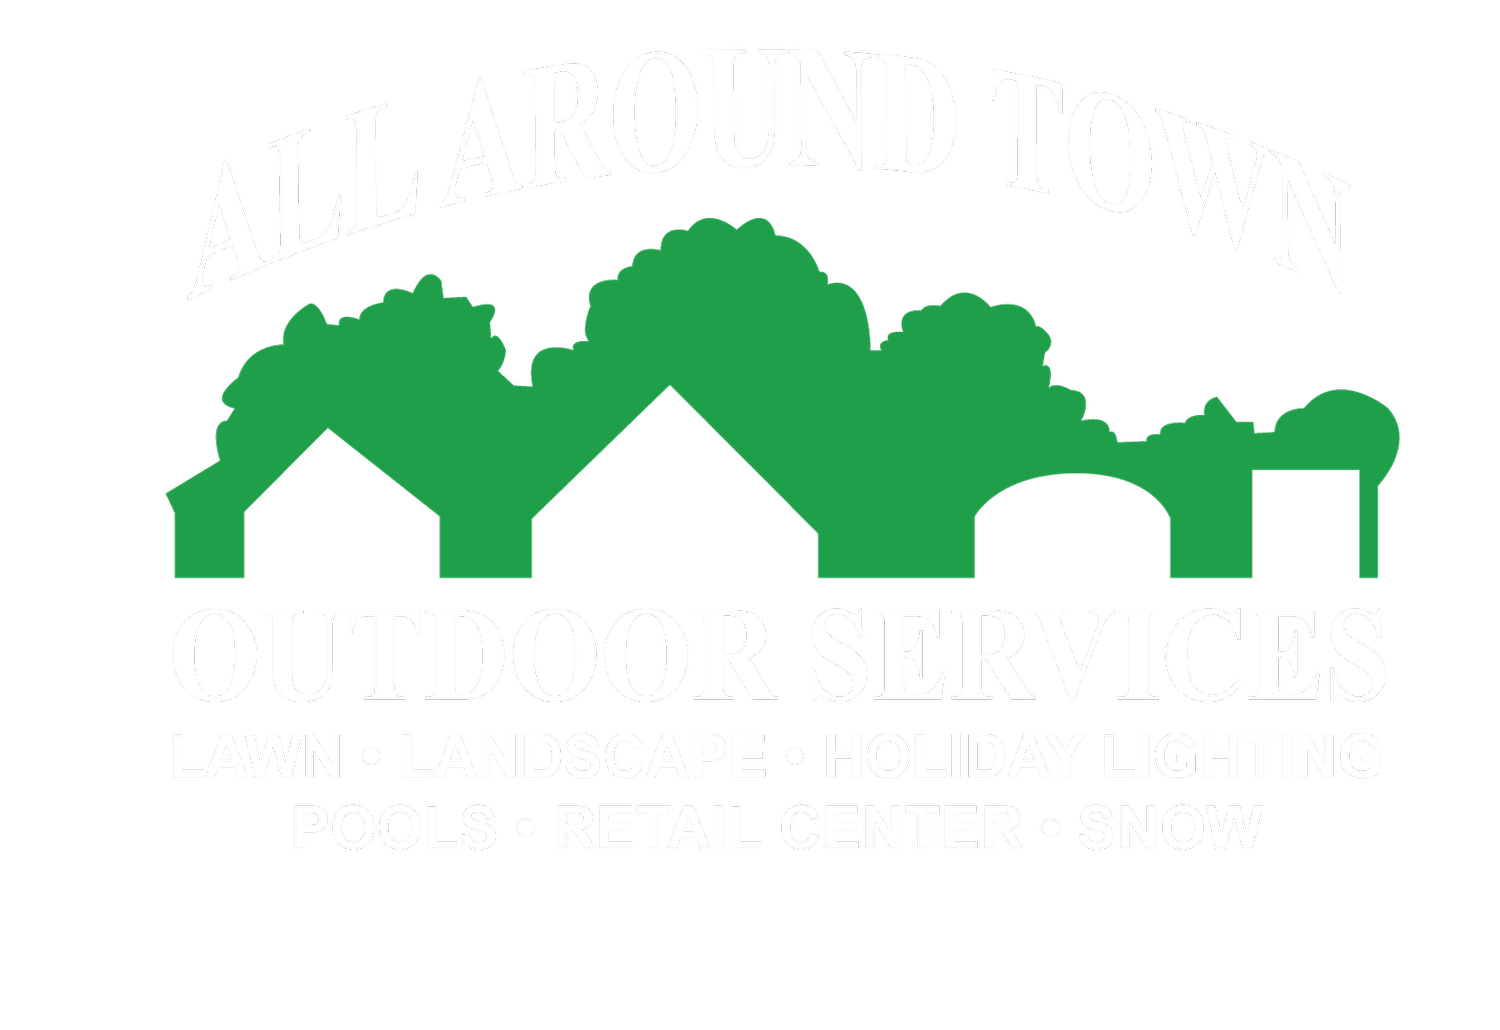 All Around Town Outdoor Services